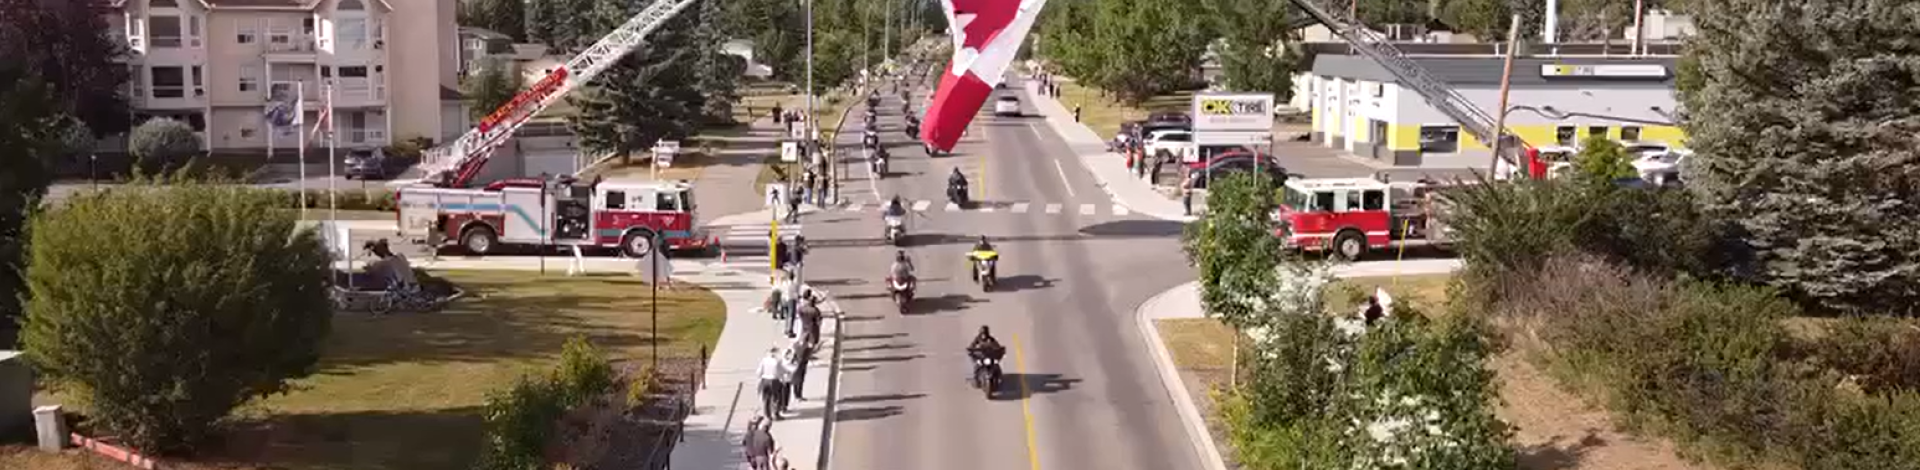 Rolling Barage motorcycle procession driving down Veterans Way